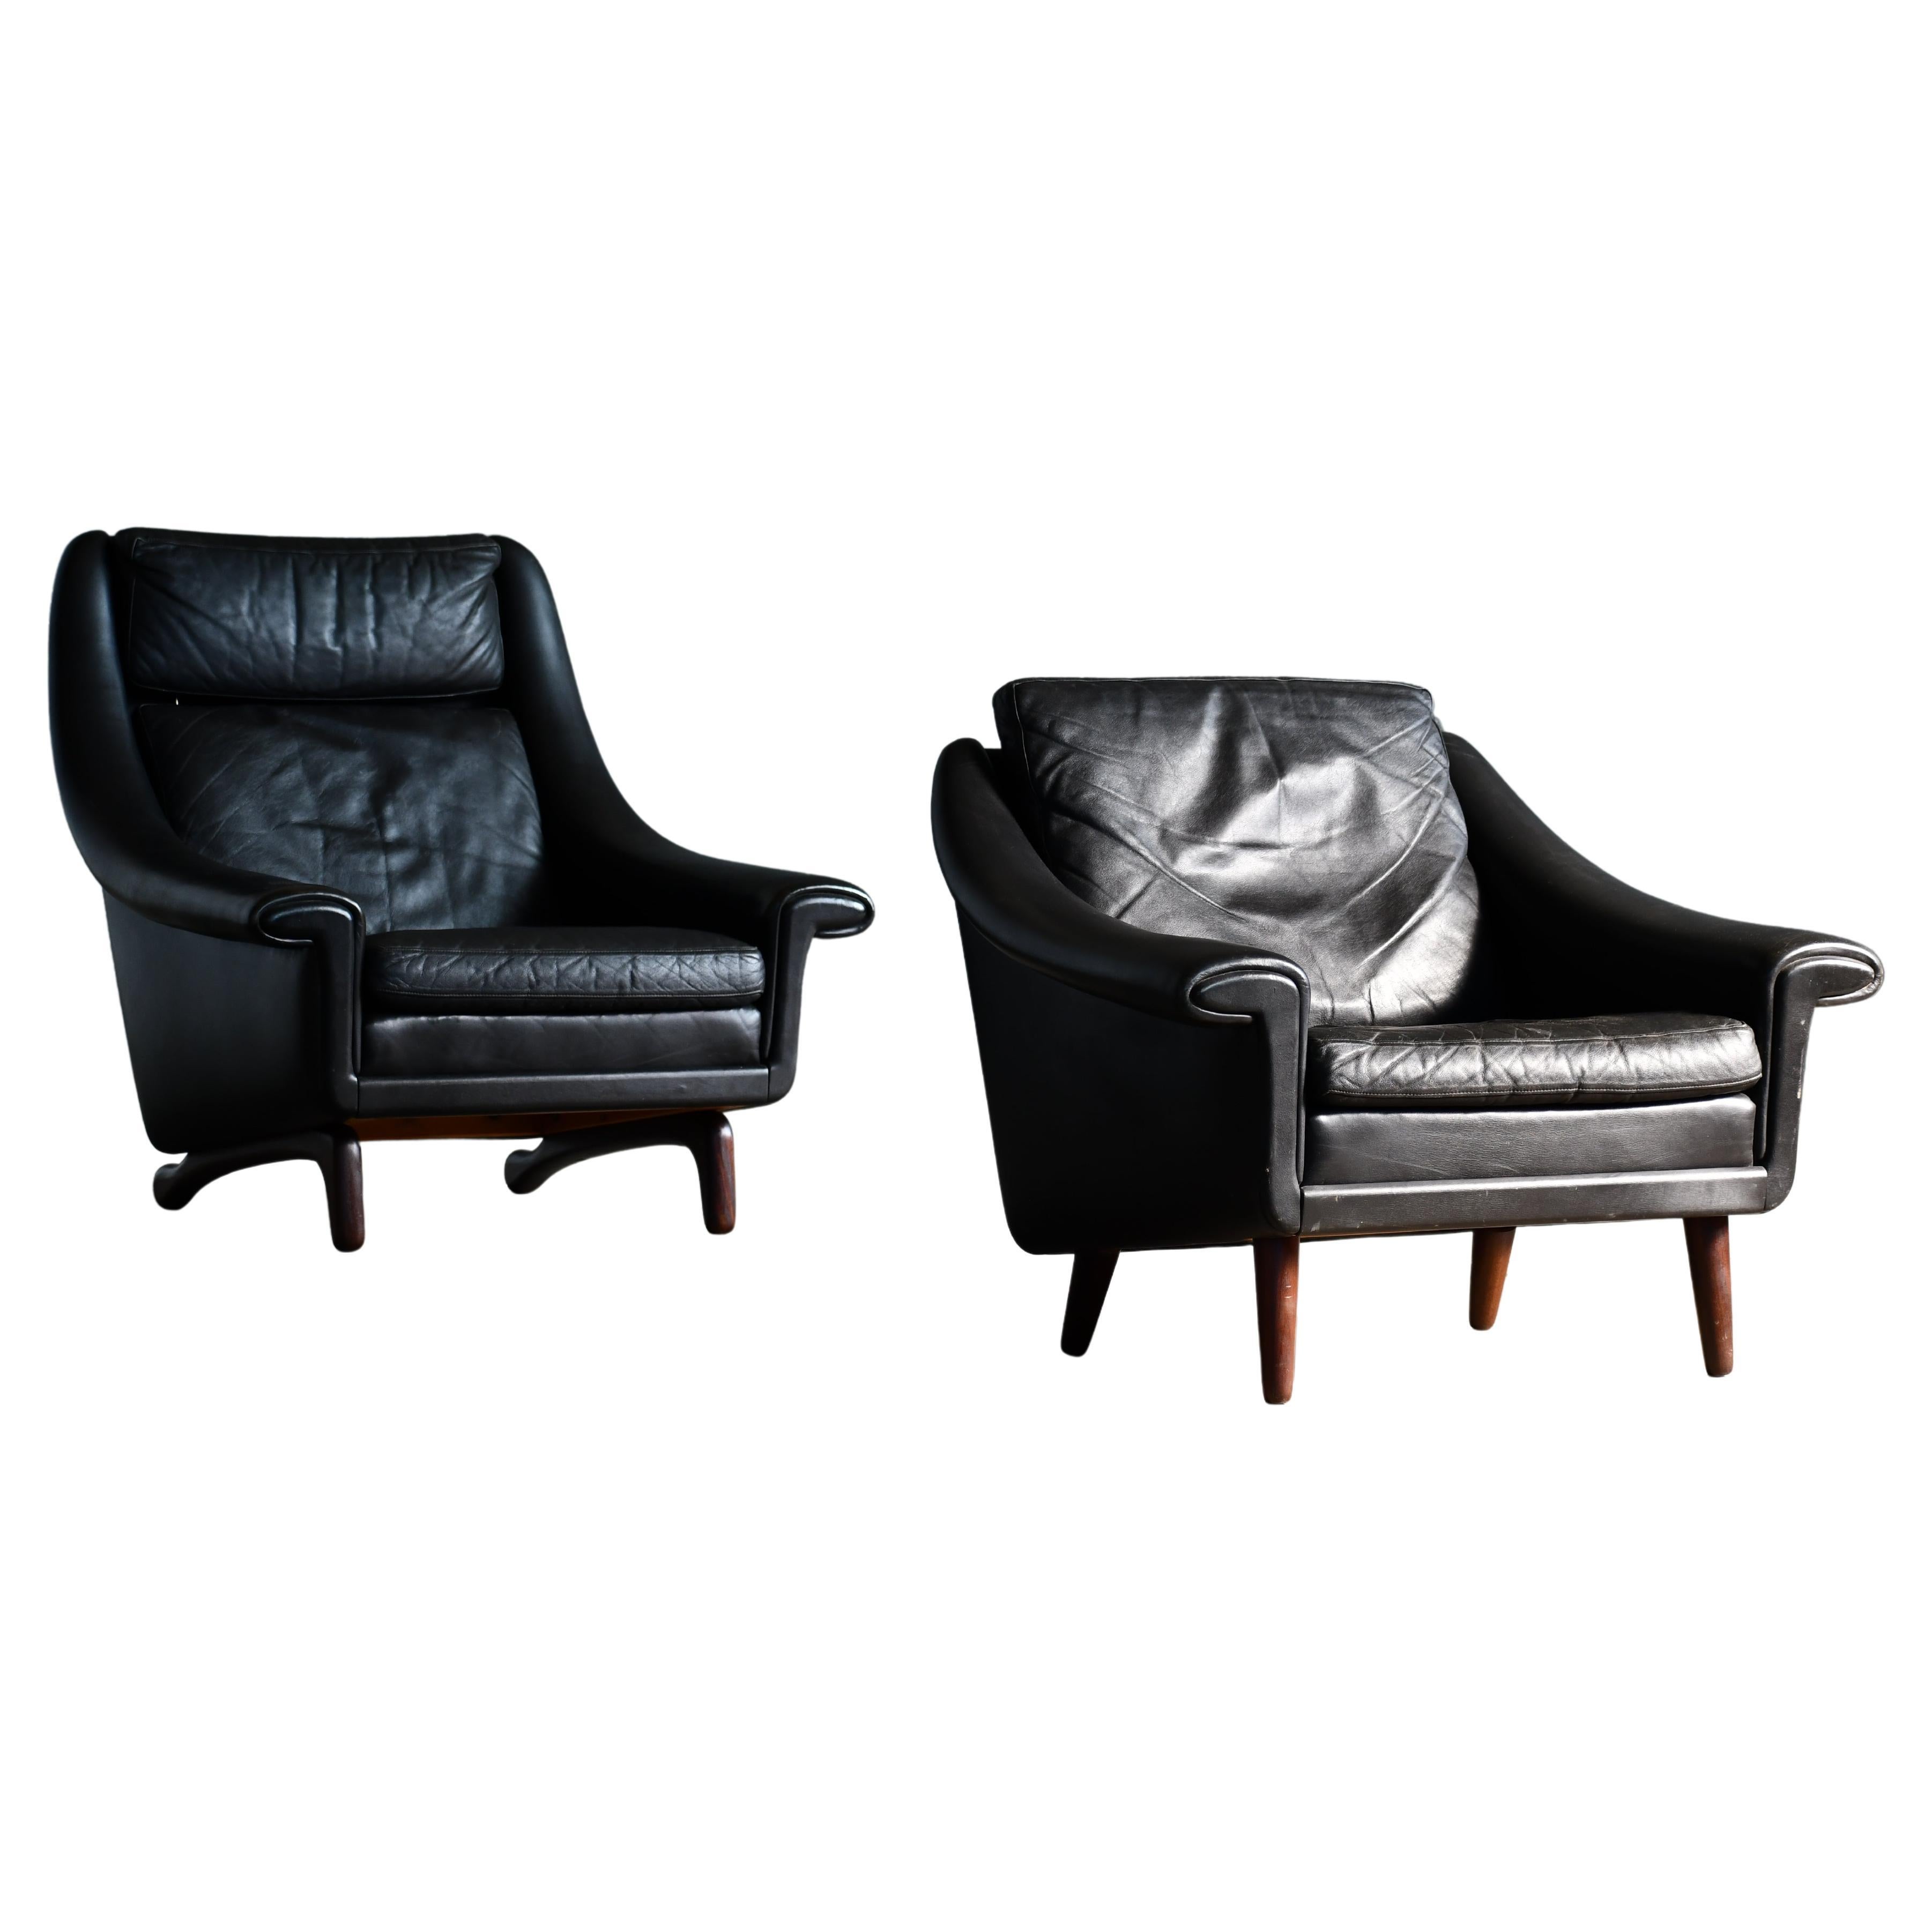 Pair of 1960s Easy Lounge Chairs Model Matador in Black Leather and Teak Base